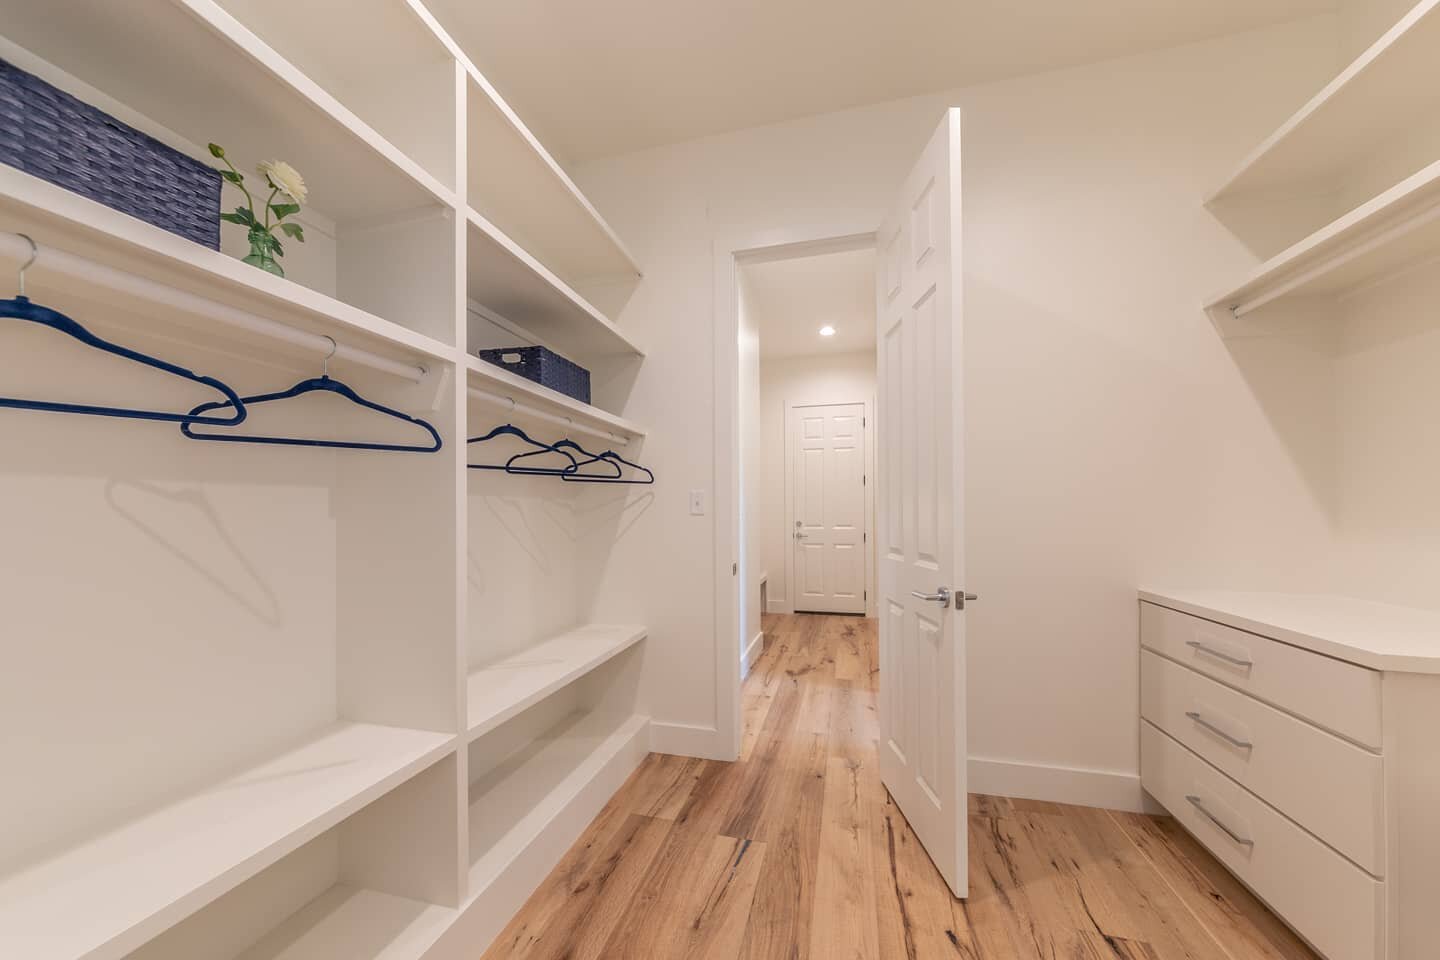 Simplicity is key. This master closet has two points of access and is right next to the laundry room. Talk about efficient.
.
.
#RealEstate #Realtor #Realty #ForSale #NewHome #HouseHunting #Milliondollarlisting #Homesale #Homesforsale #Property #Prop